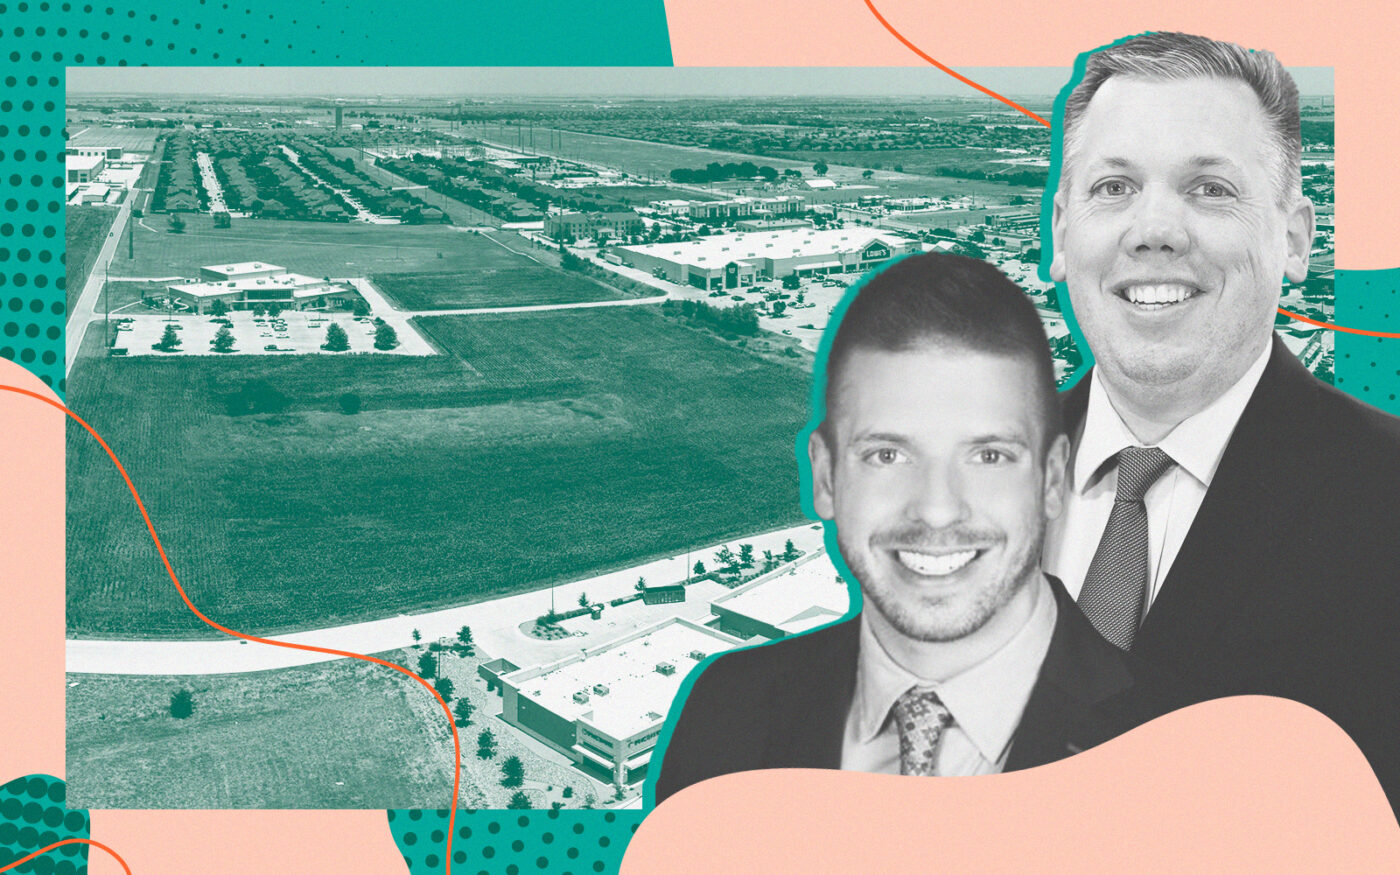 Common Ground's David Luebke and Hutto Mayor Mike Snyder with development site for Project ESLO